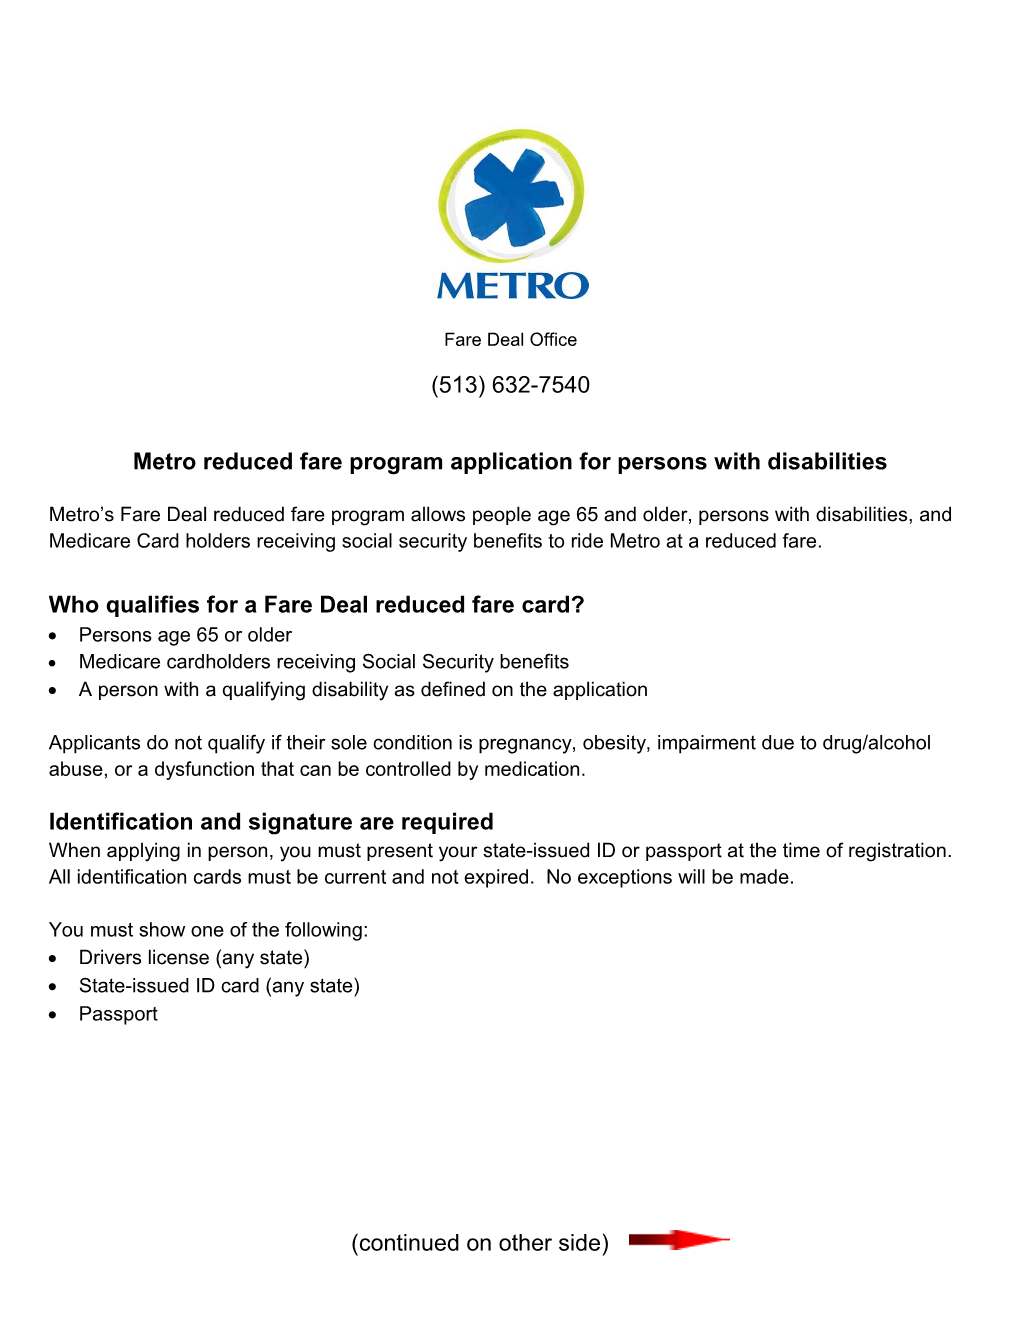 Metro Reduced Fare Program Application for Persons with Disabilities